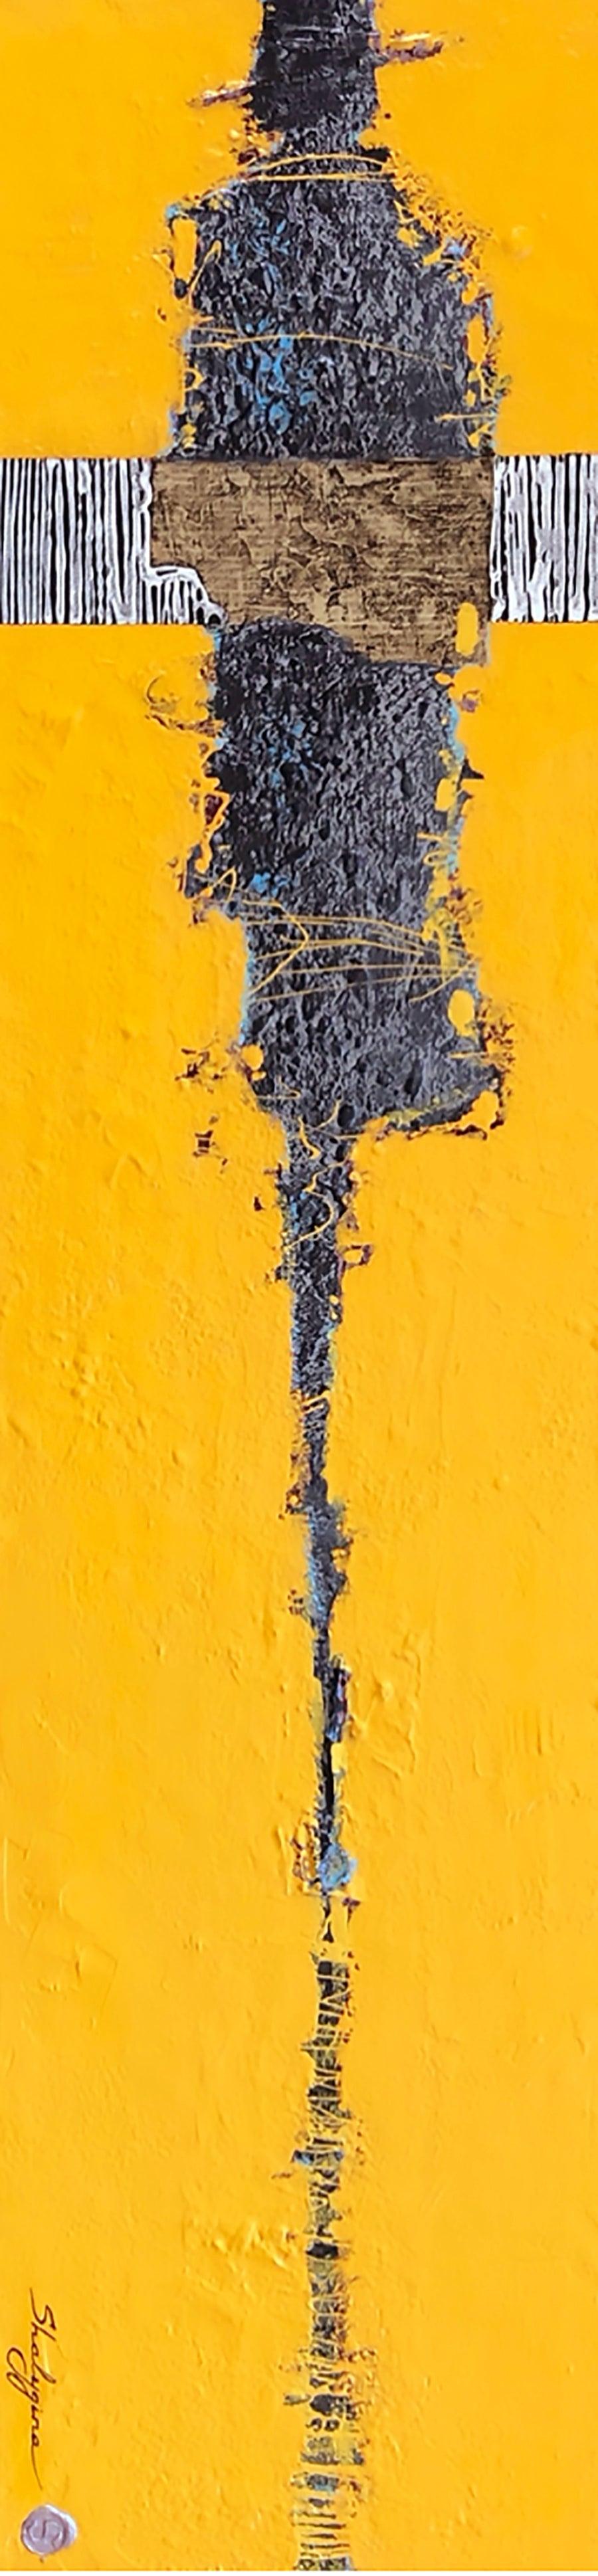 Yellow Grey Figure Contemporary Figurative Abstract Painting Mixed Media 48x12